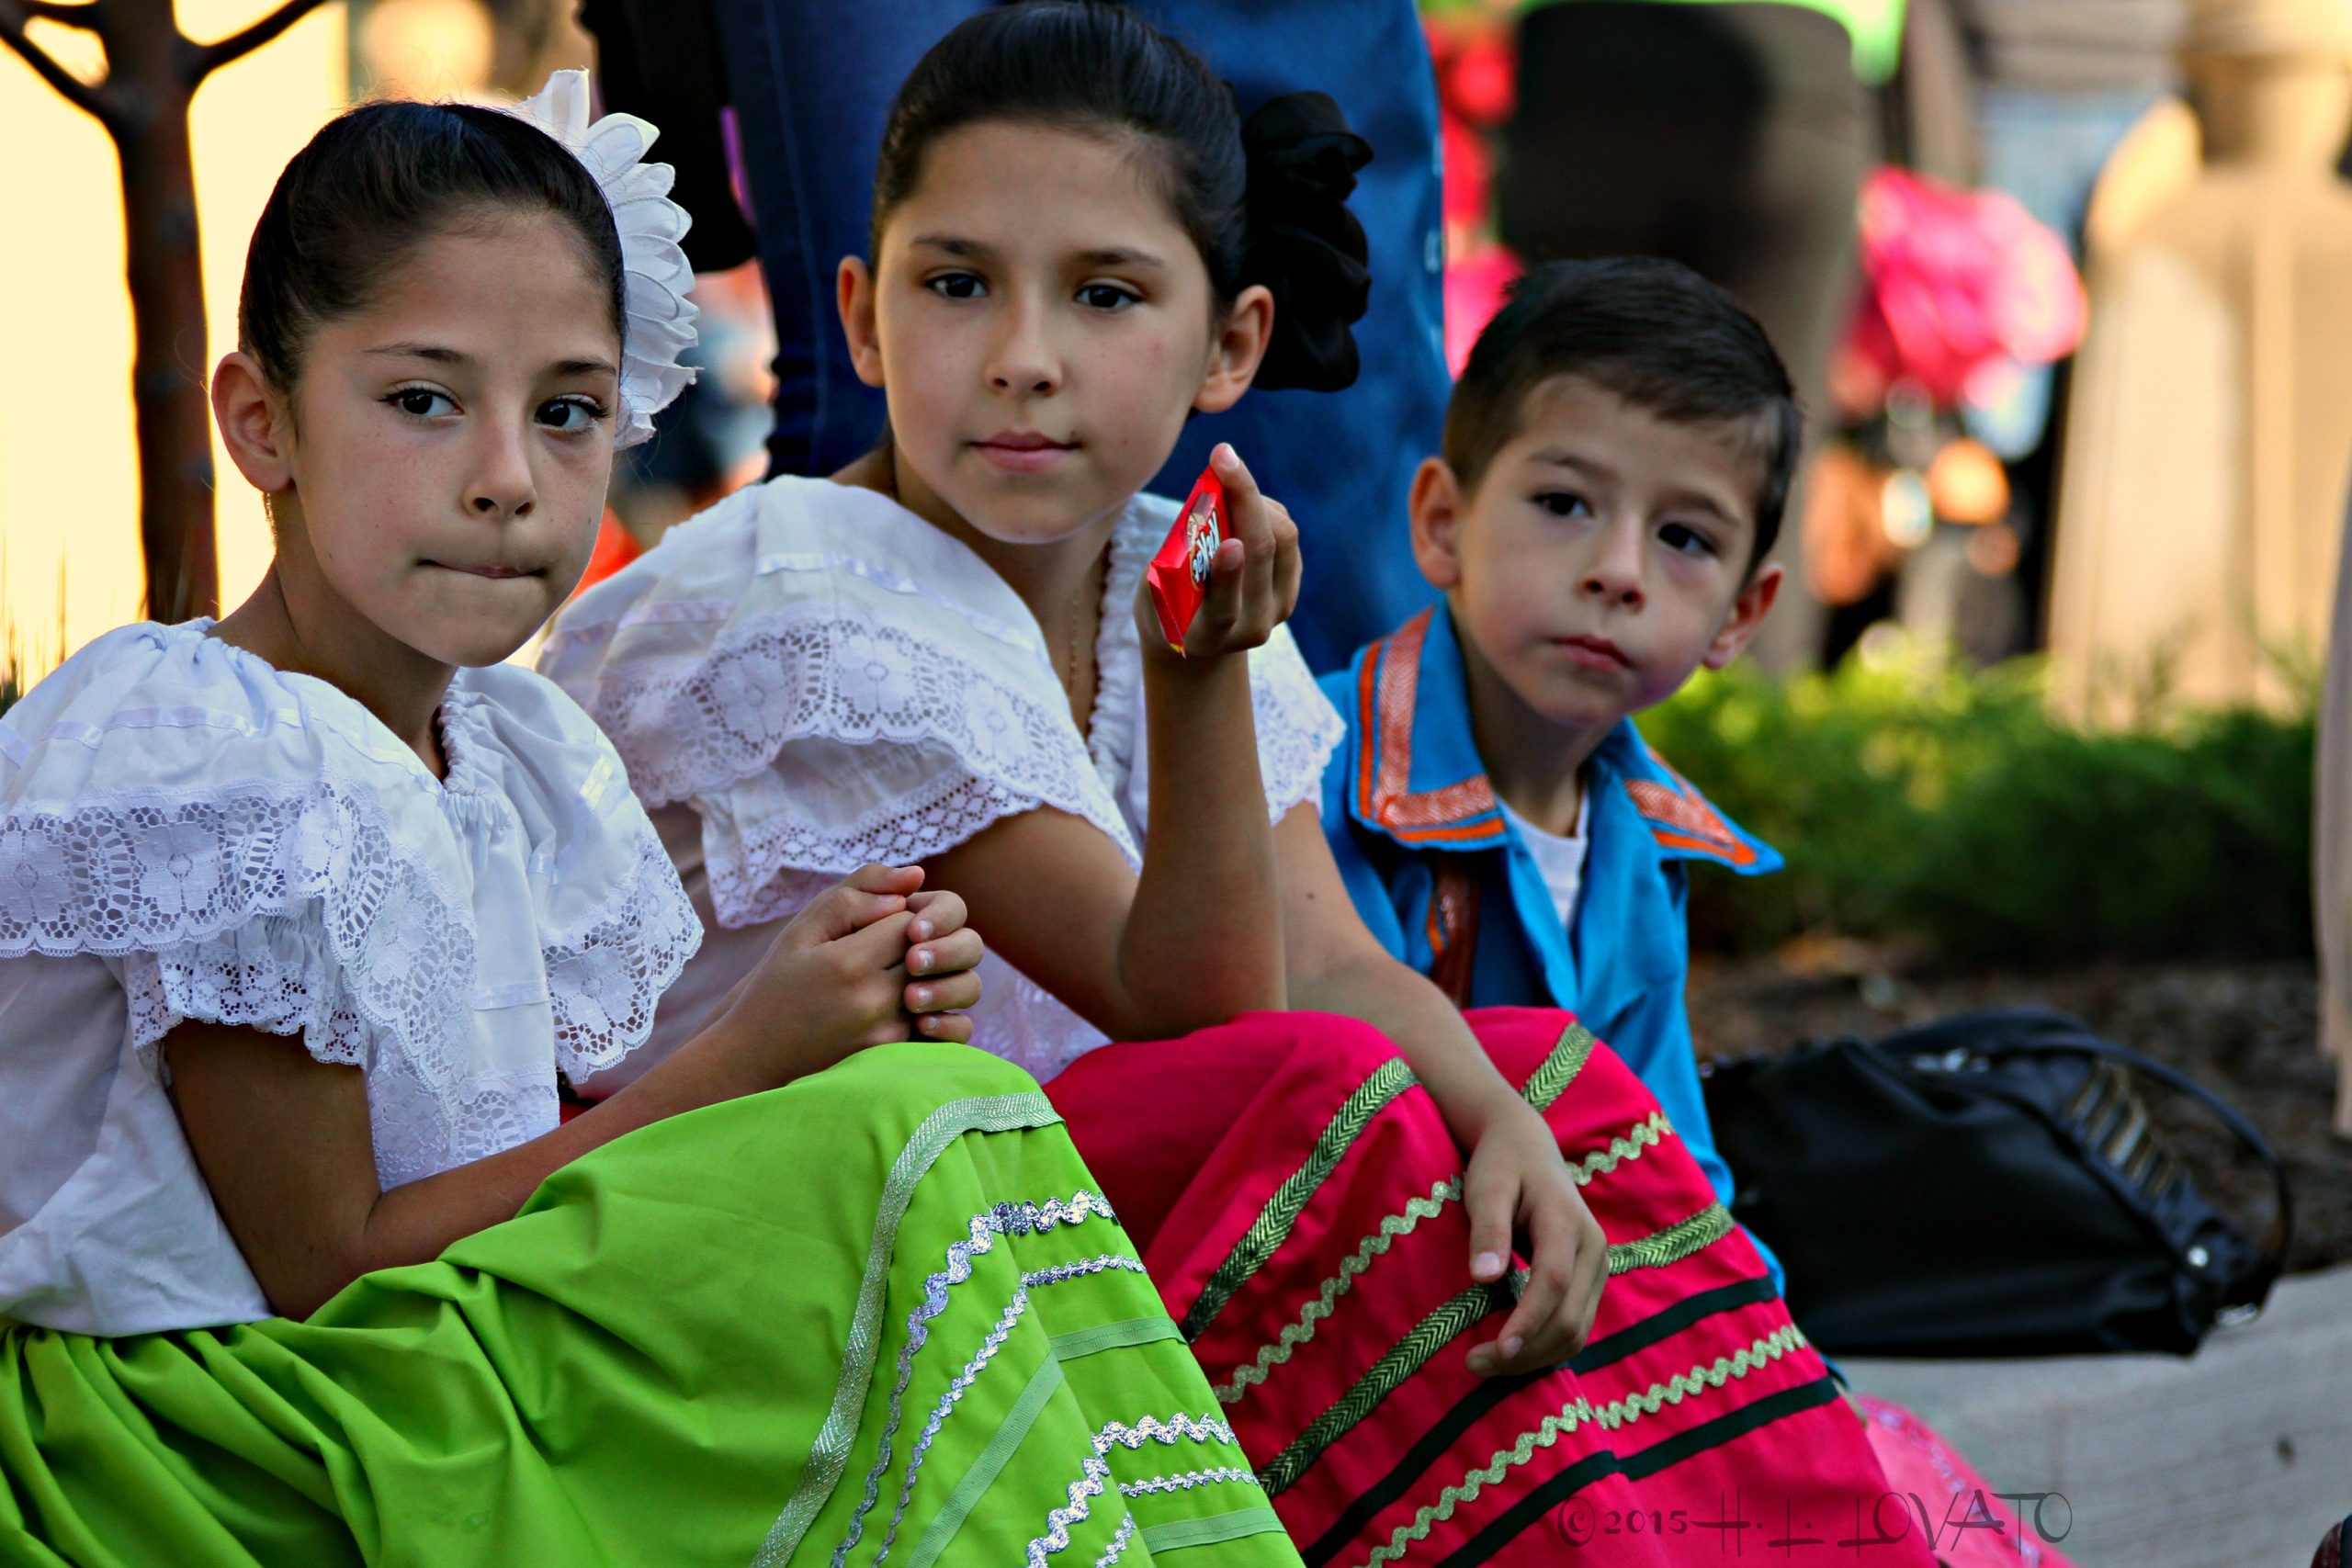 Children dressed in traditional clothing